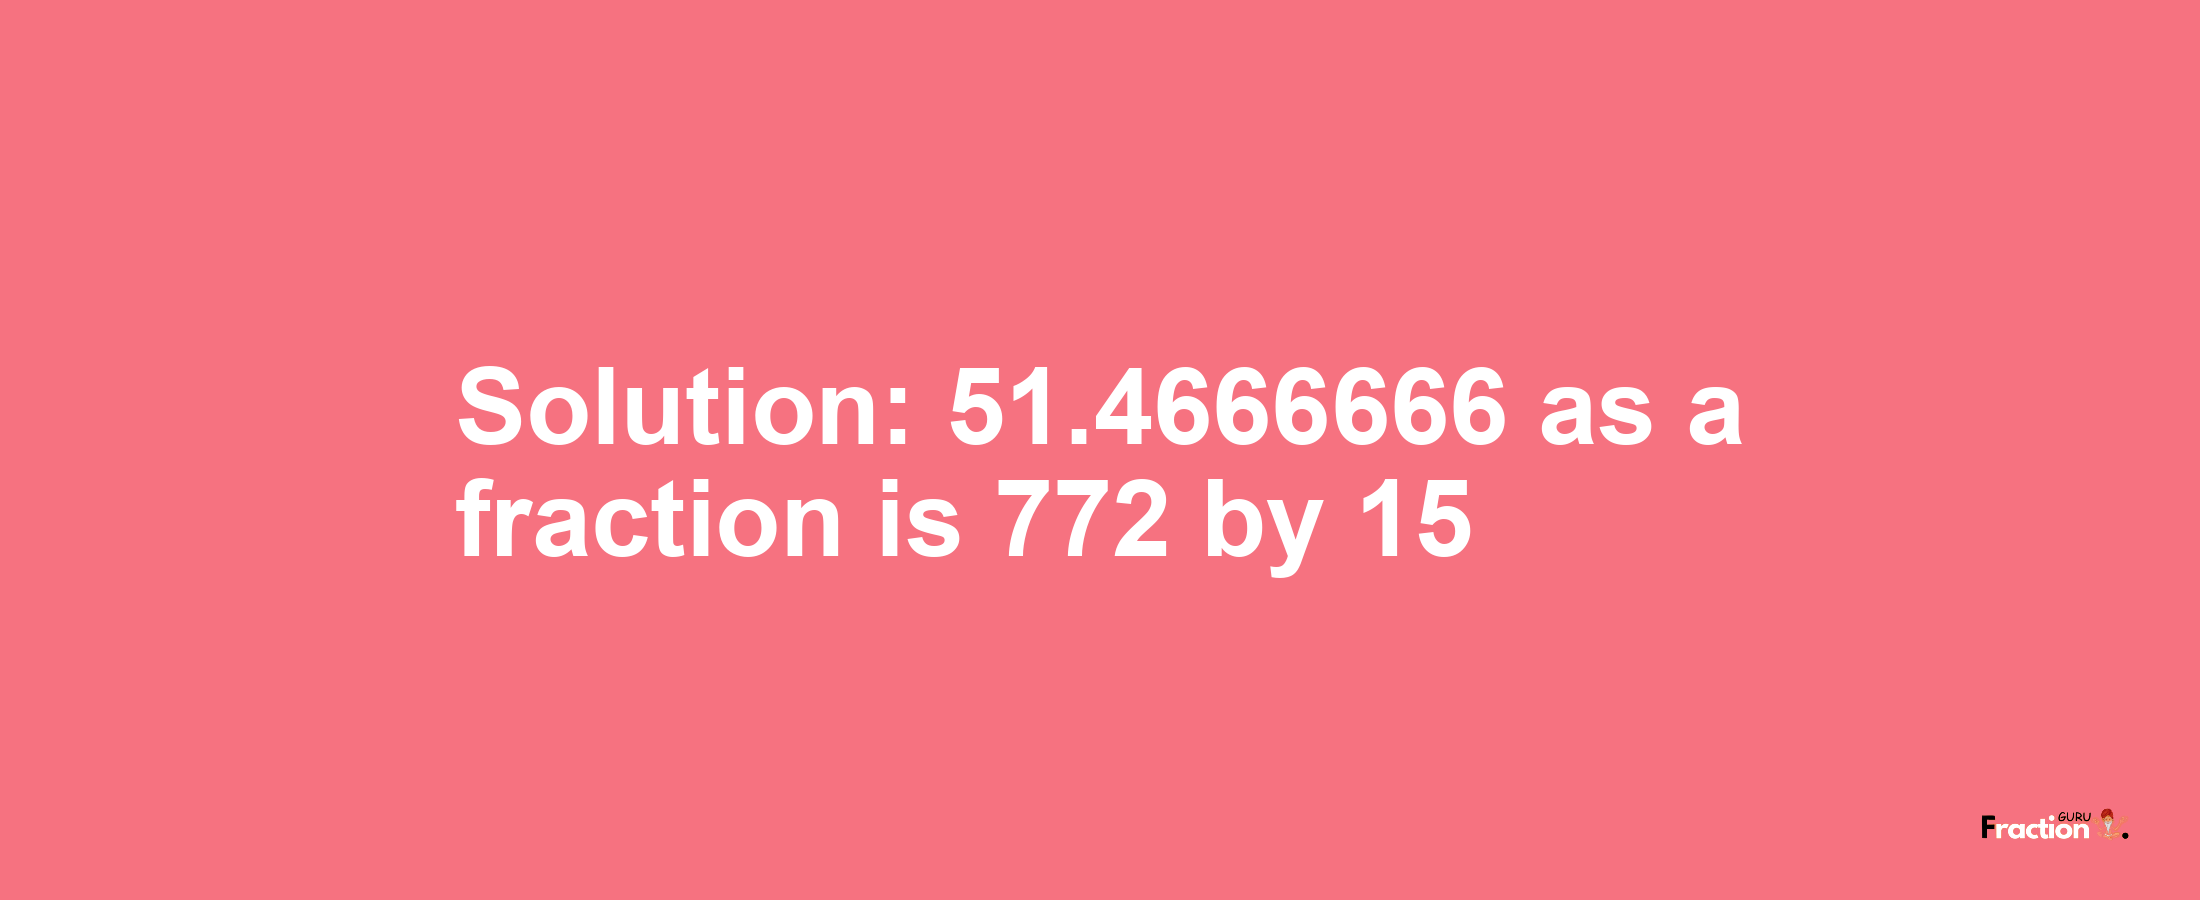 Solution:51.4666666 as a fraction is 772/15